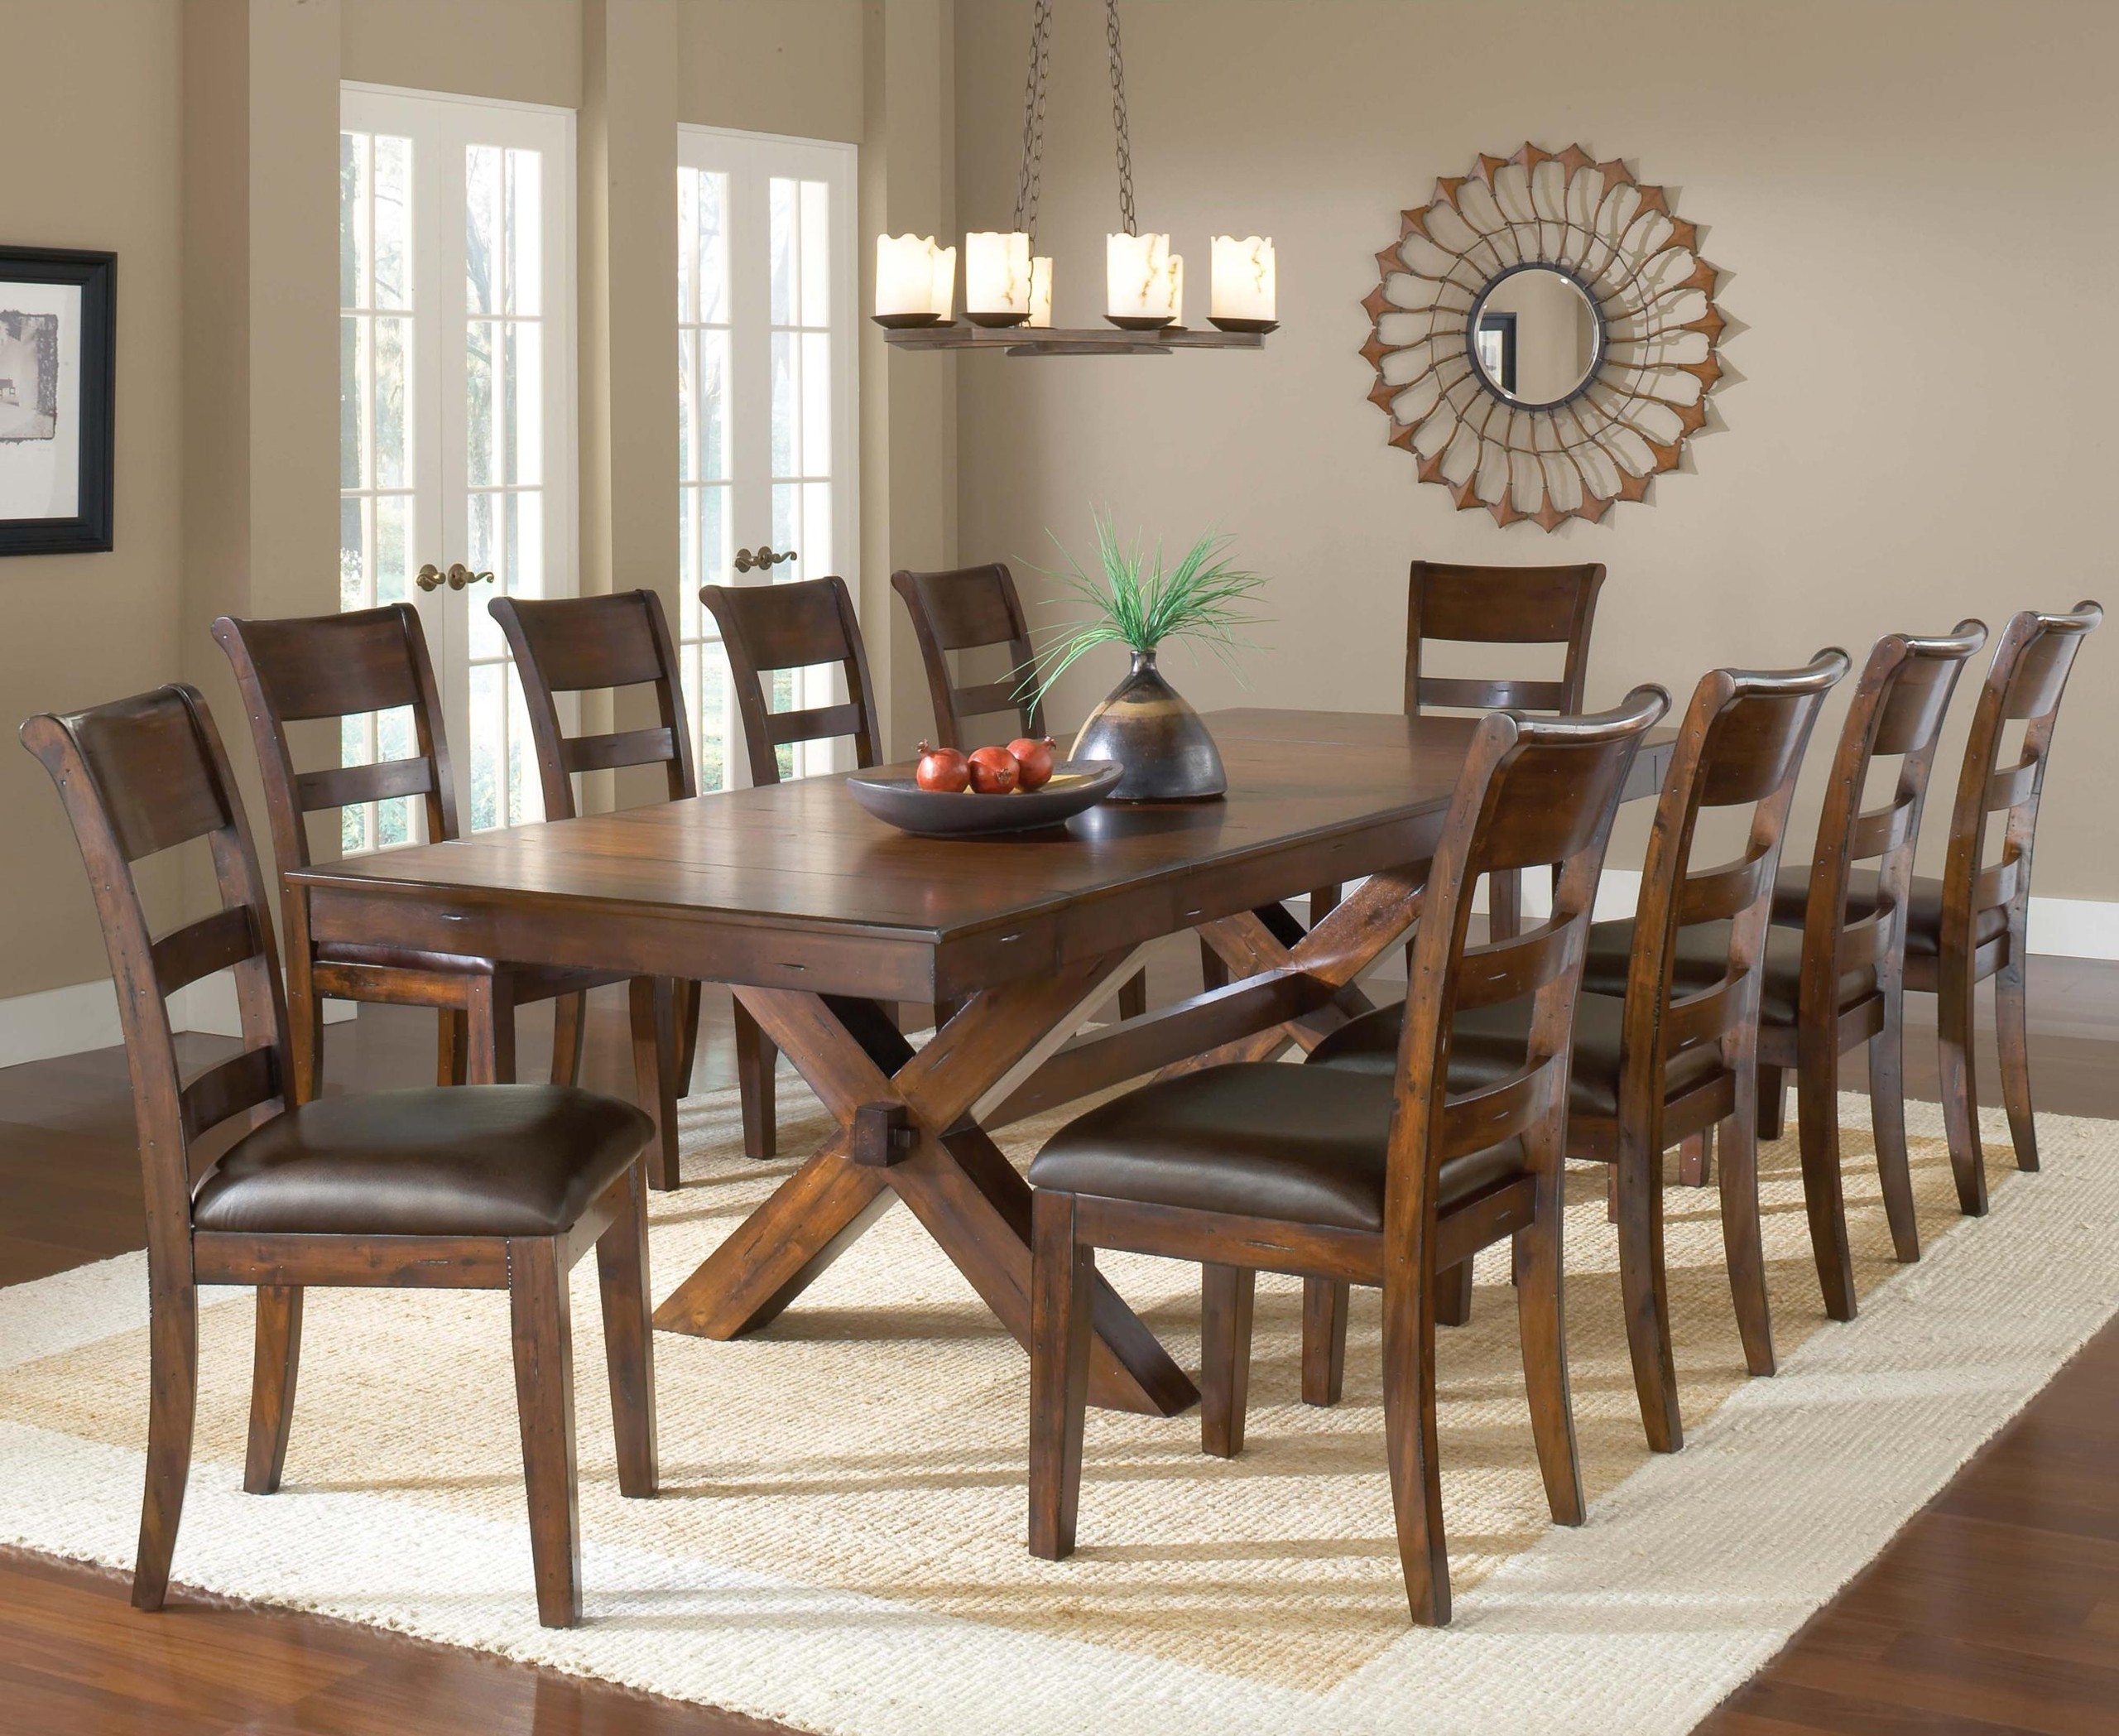 Extending dining table seats 10